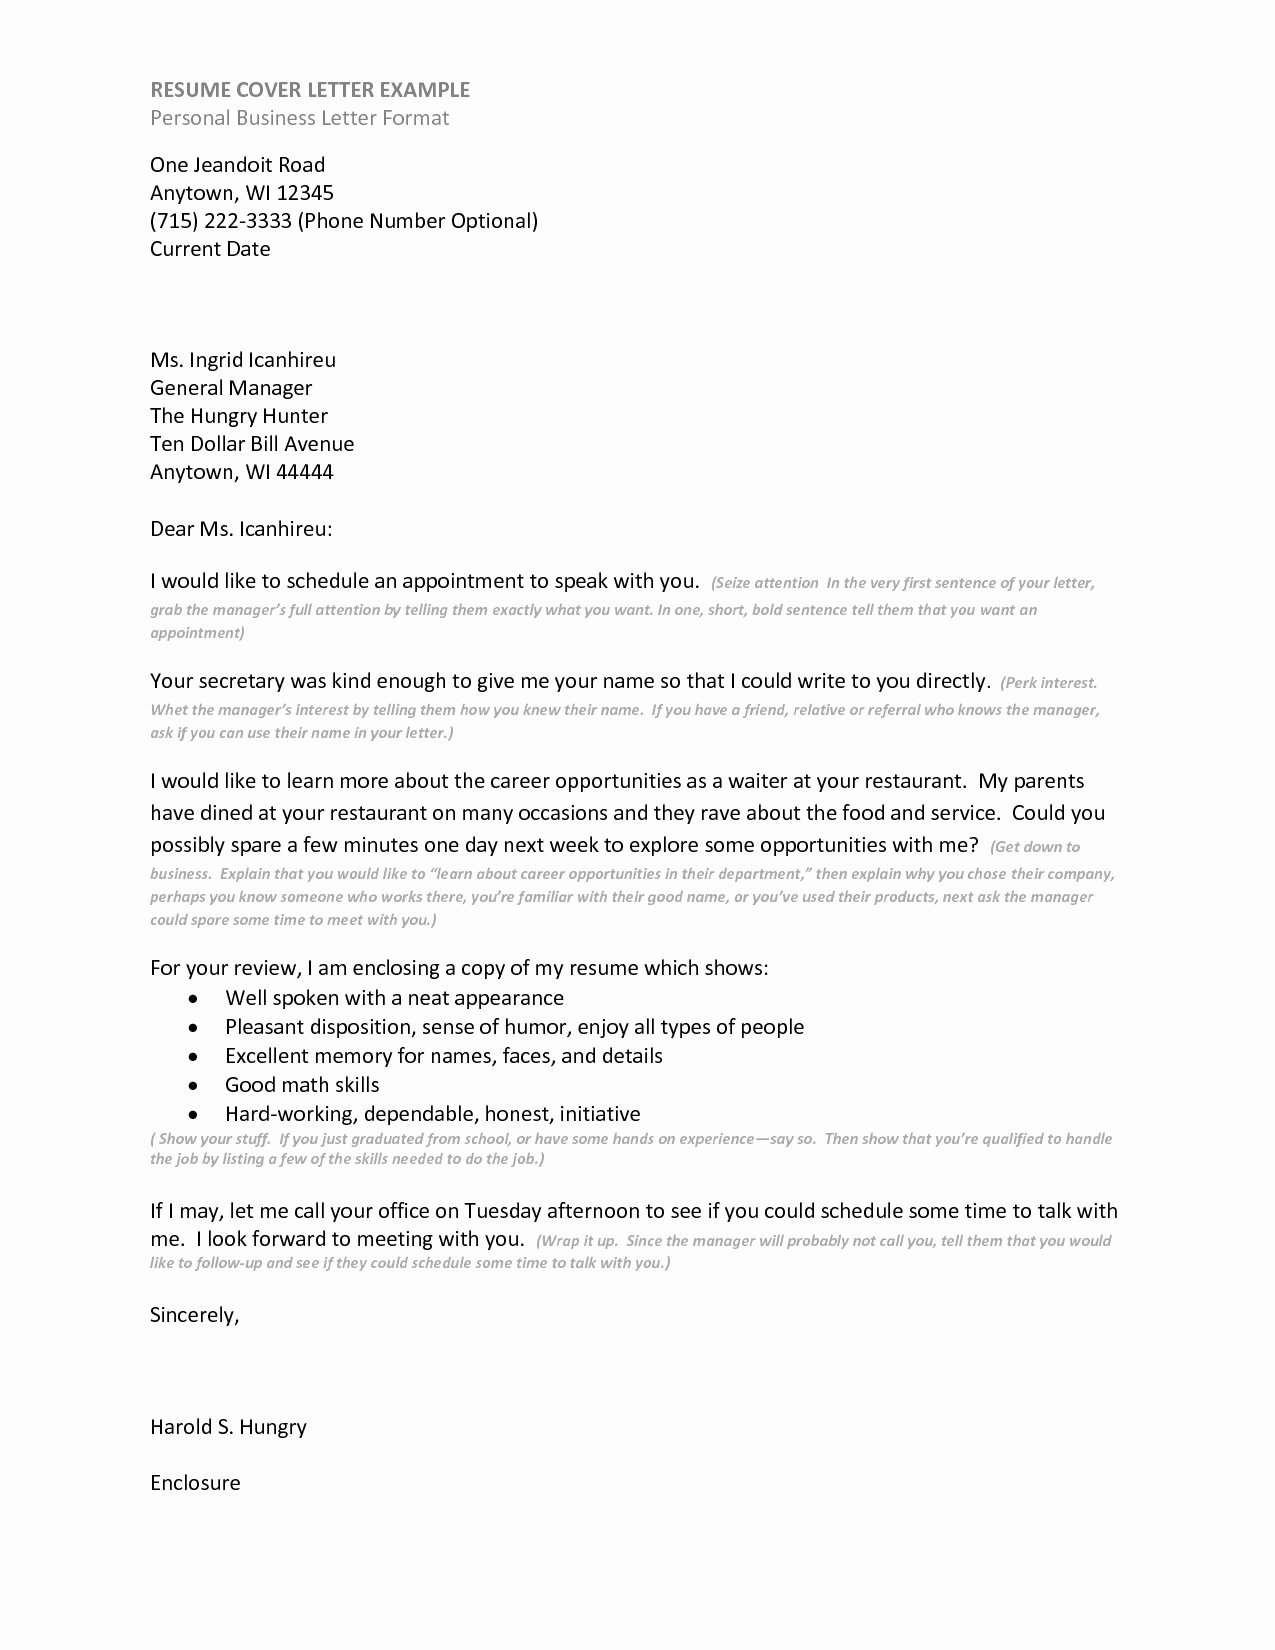 Writing A Personal Letter format New formal Business Cover Letter format